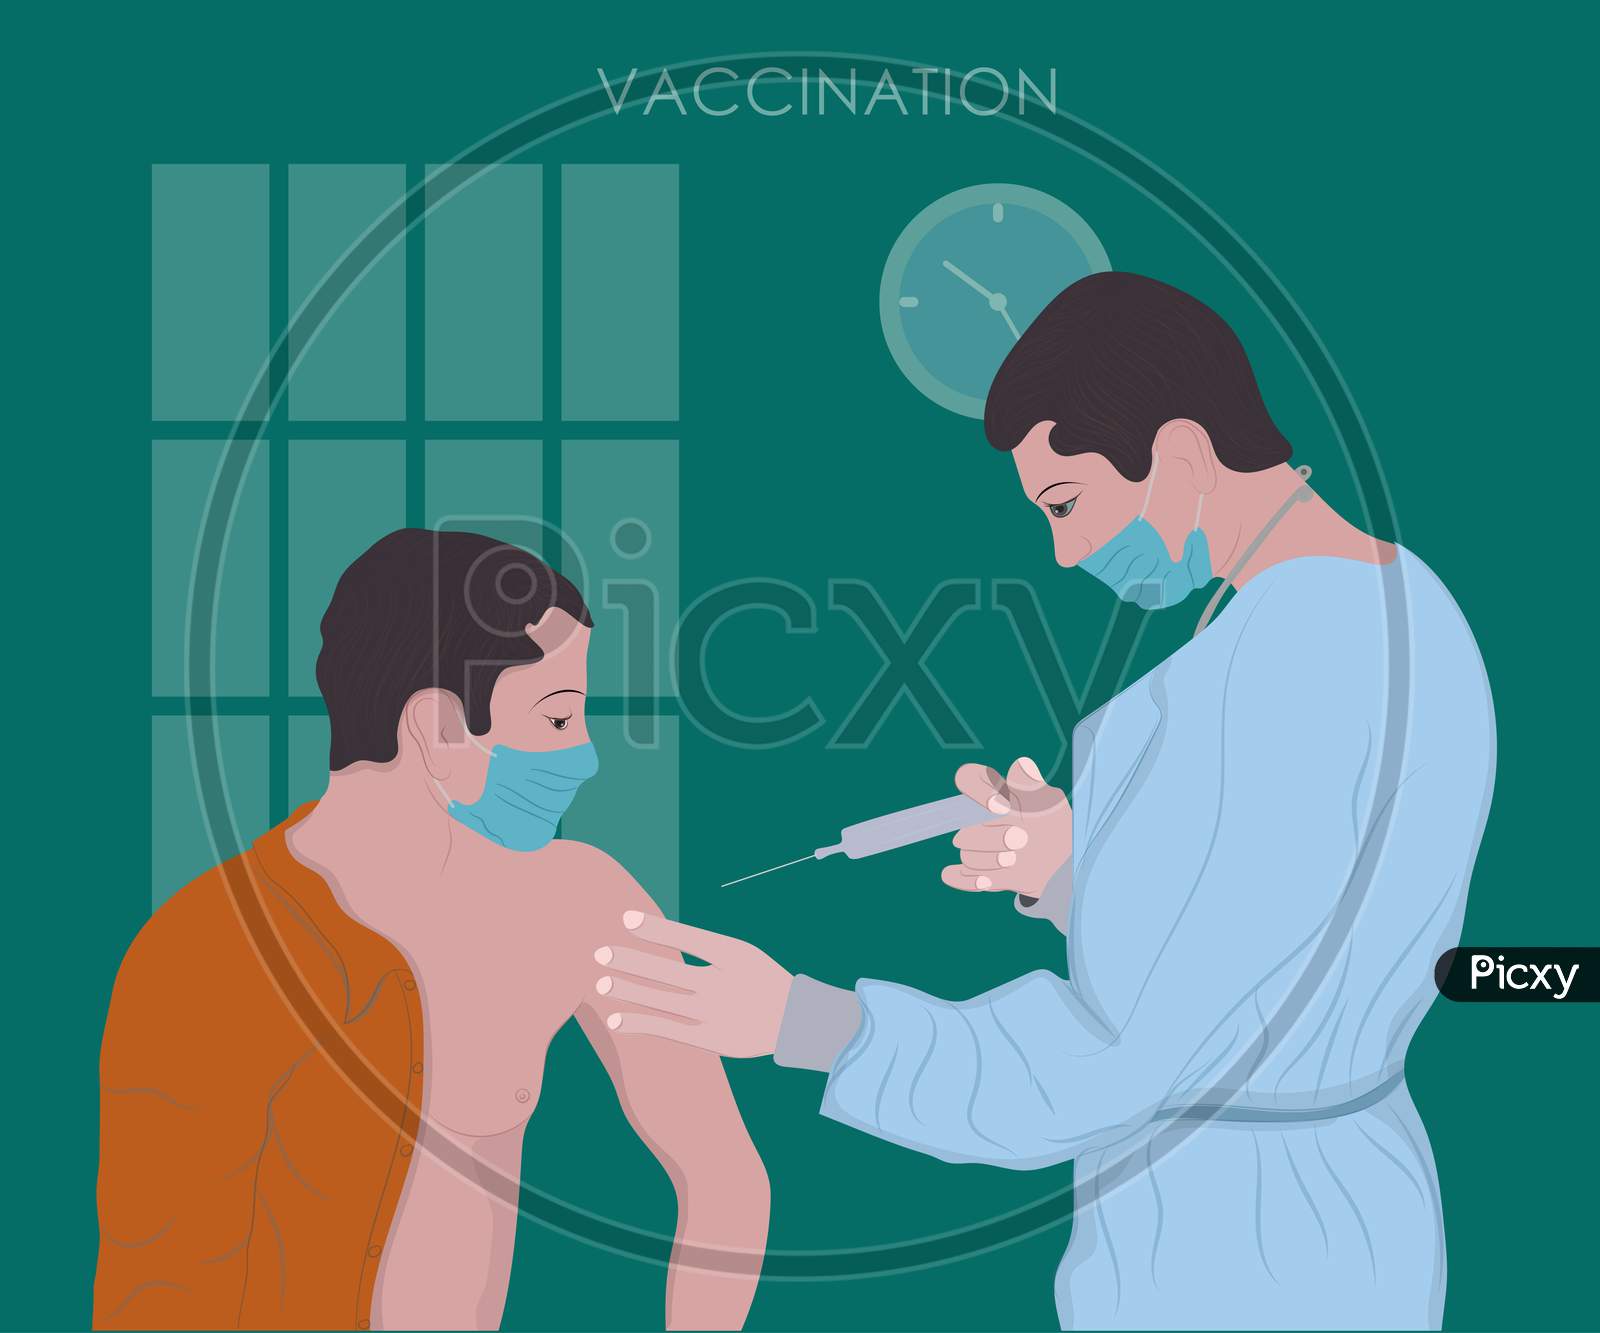 Coronavirus Vaccination Process Of Immunization Against Covid-19, Doctor Injecting A Patient